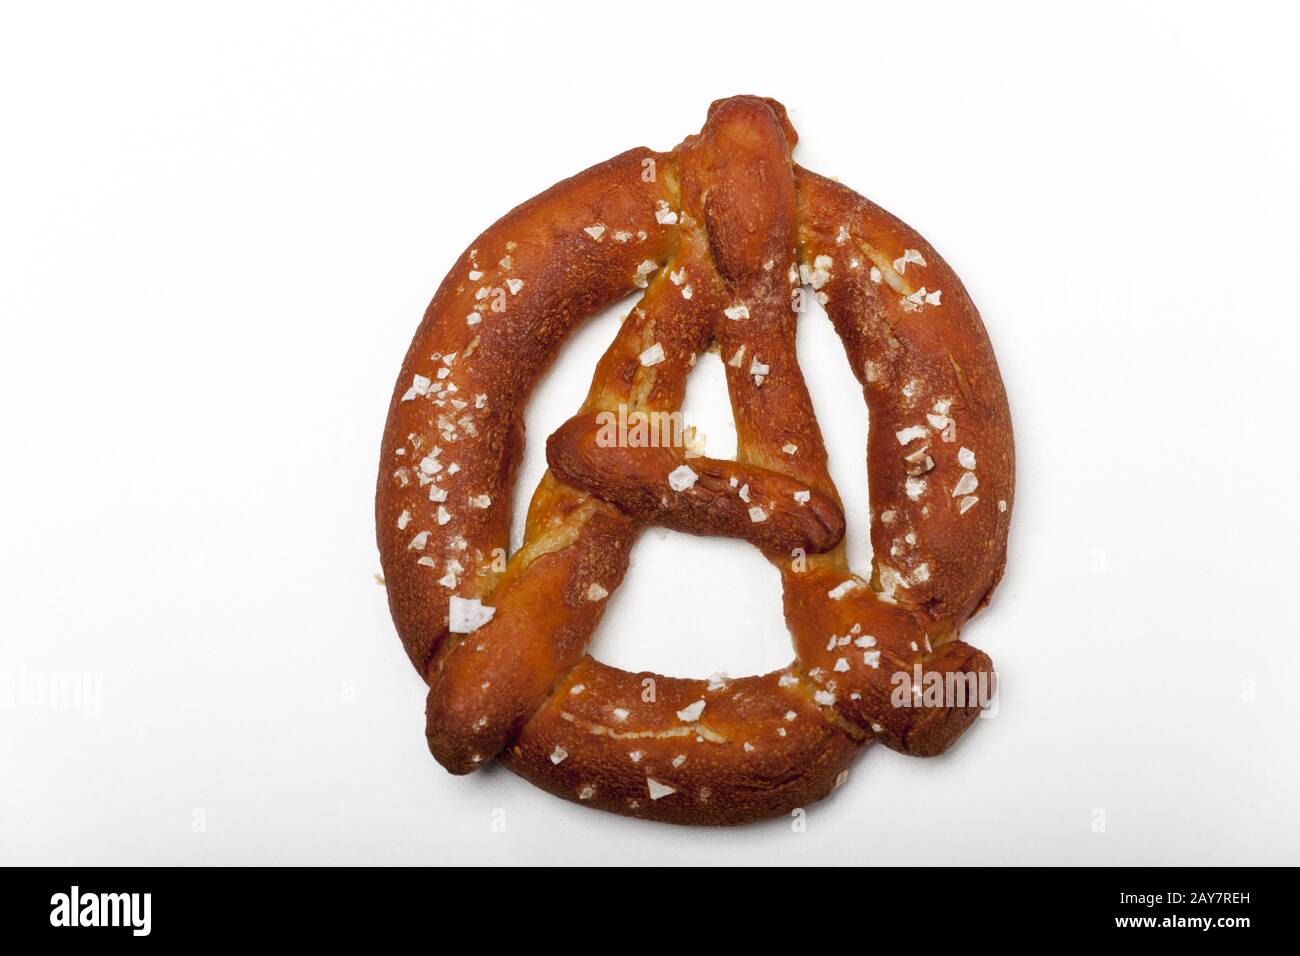 Bavarian pretzel in the form of the anarchy sign Stock Photo